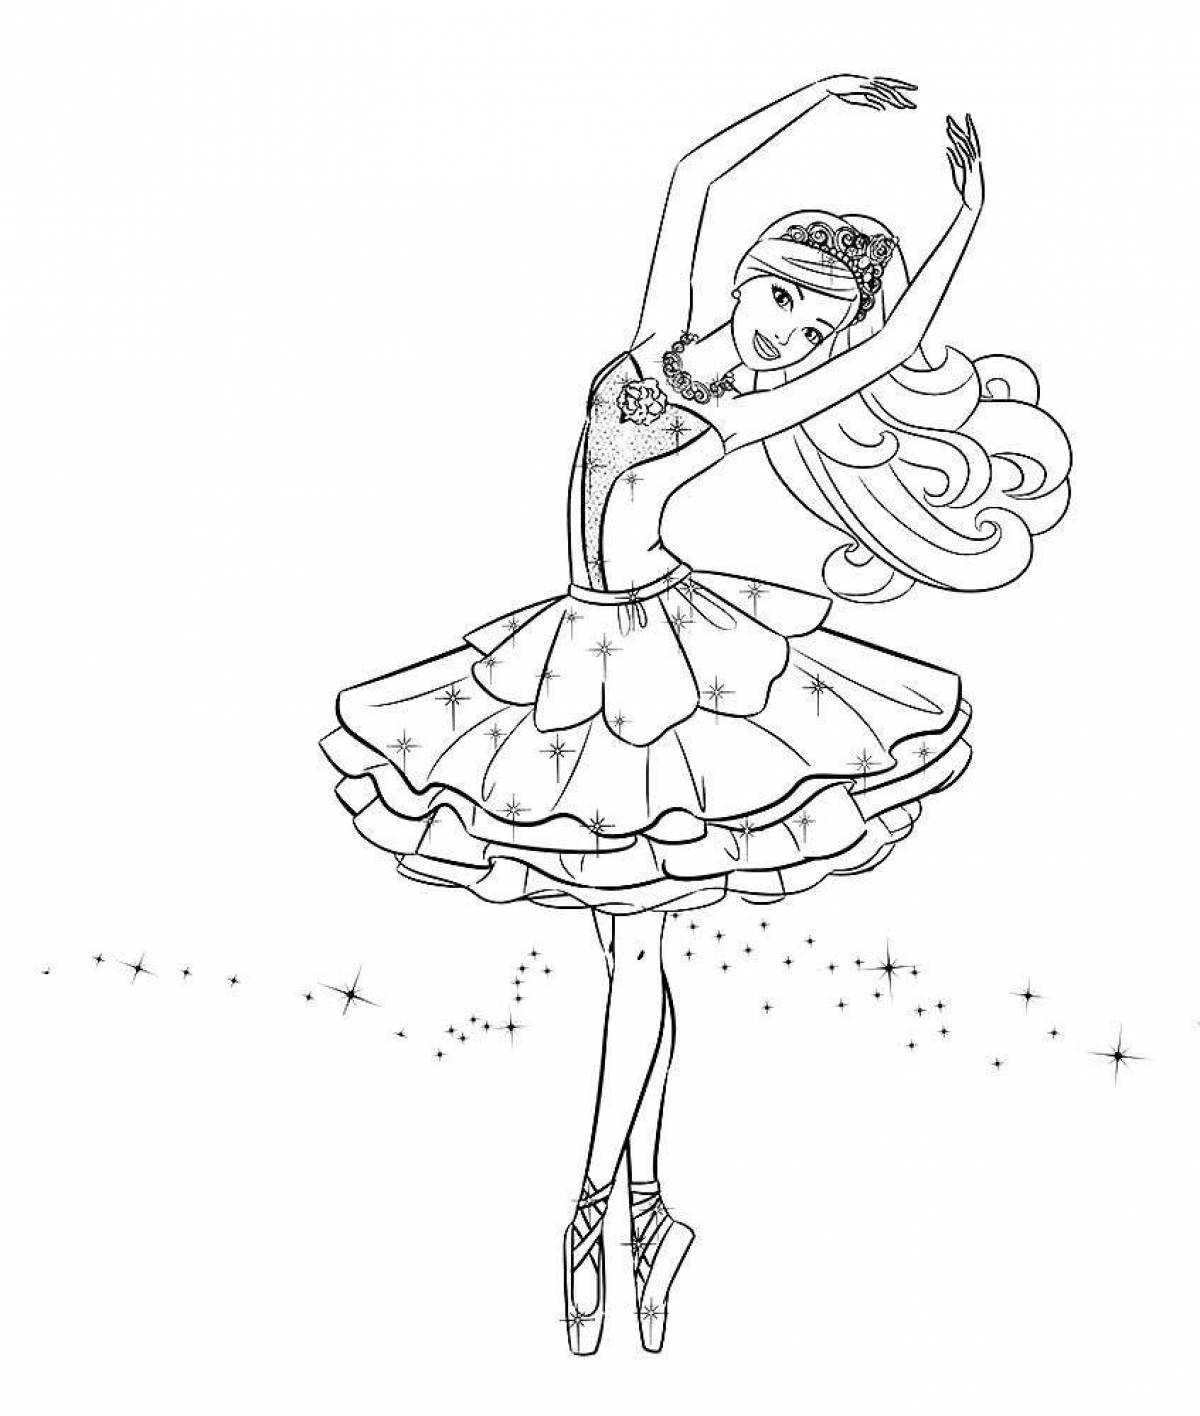 Glowing ballerina barbie coloring page